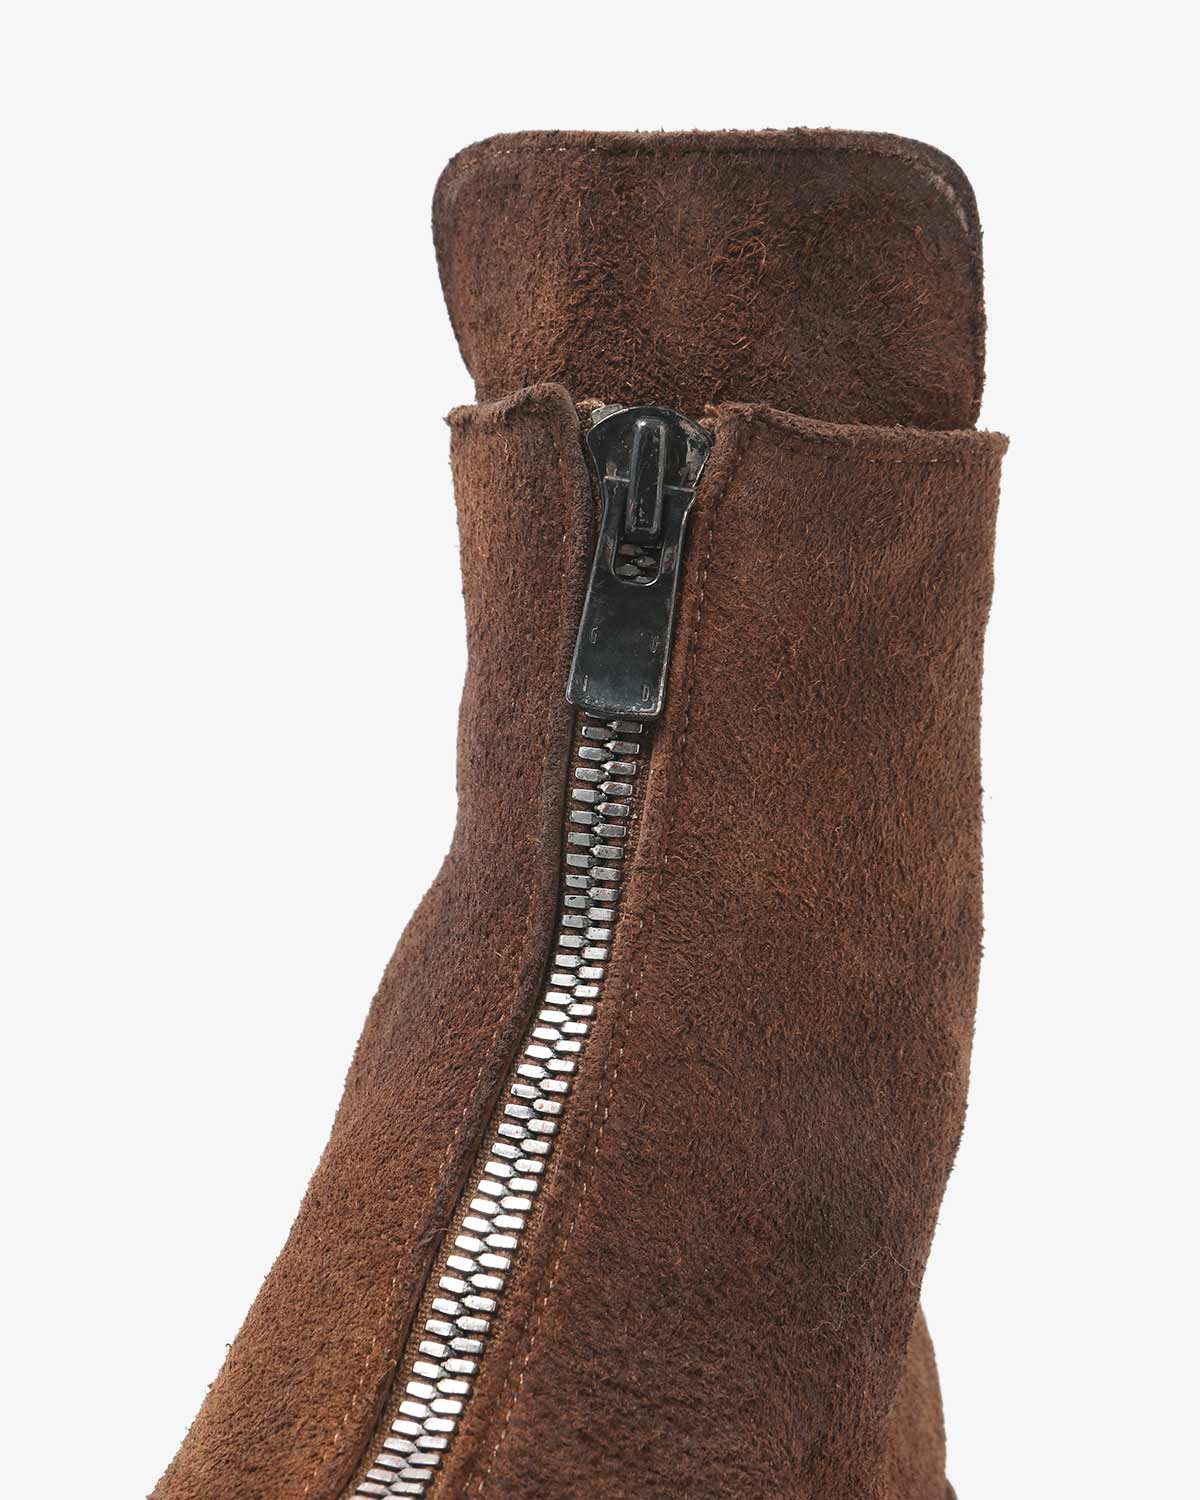 CENTER ZIP BOOTS “BIG DADDY" HORSE LEATHER by GUIDI